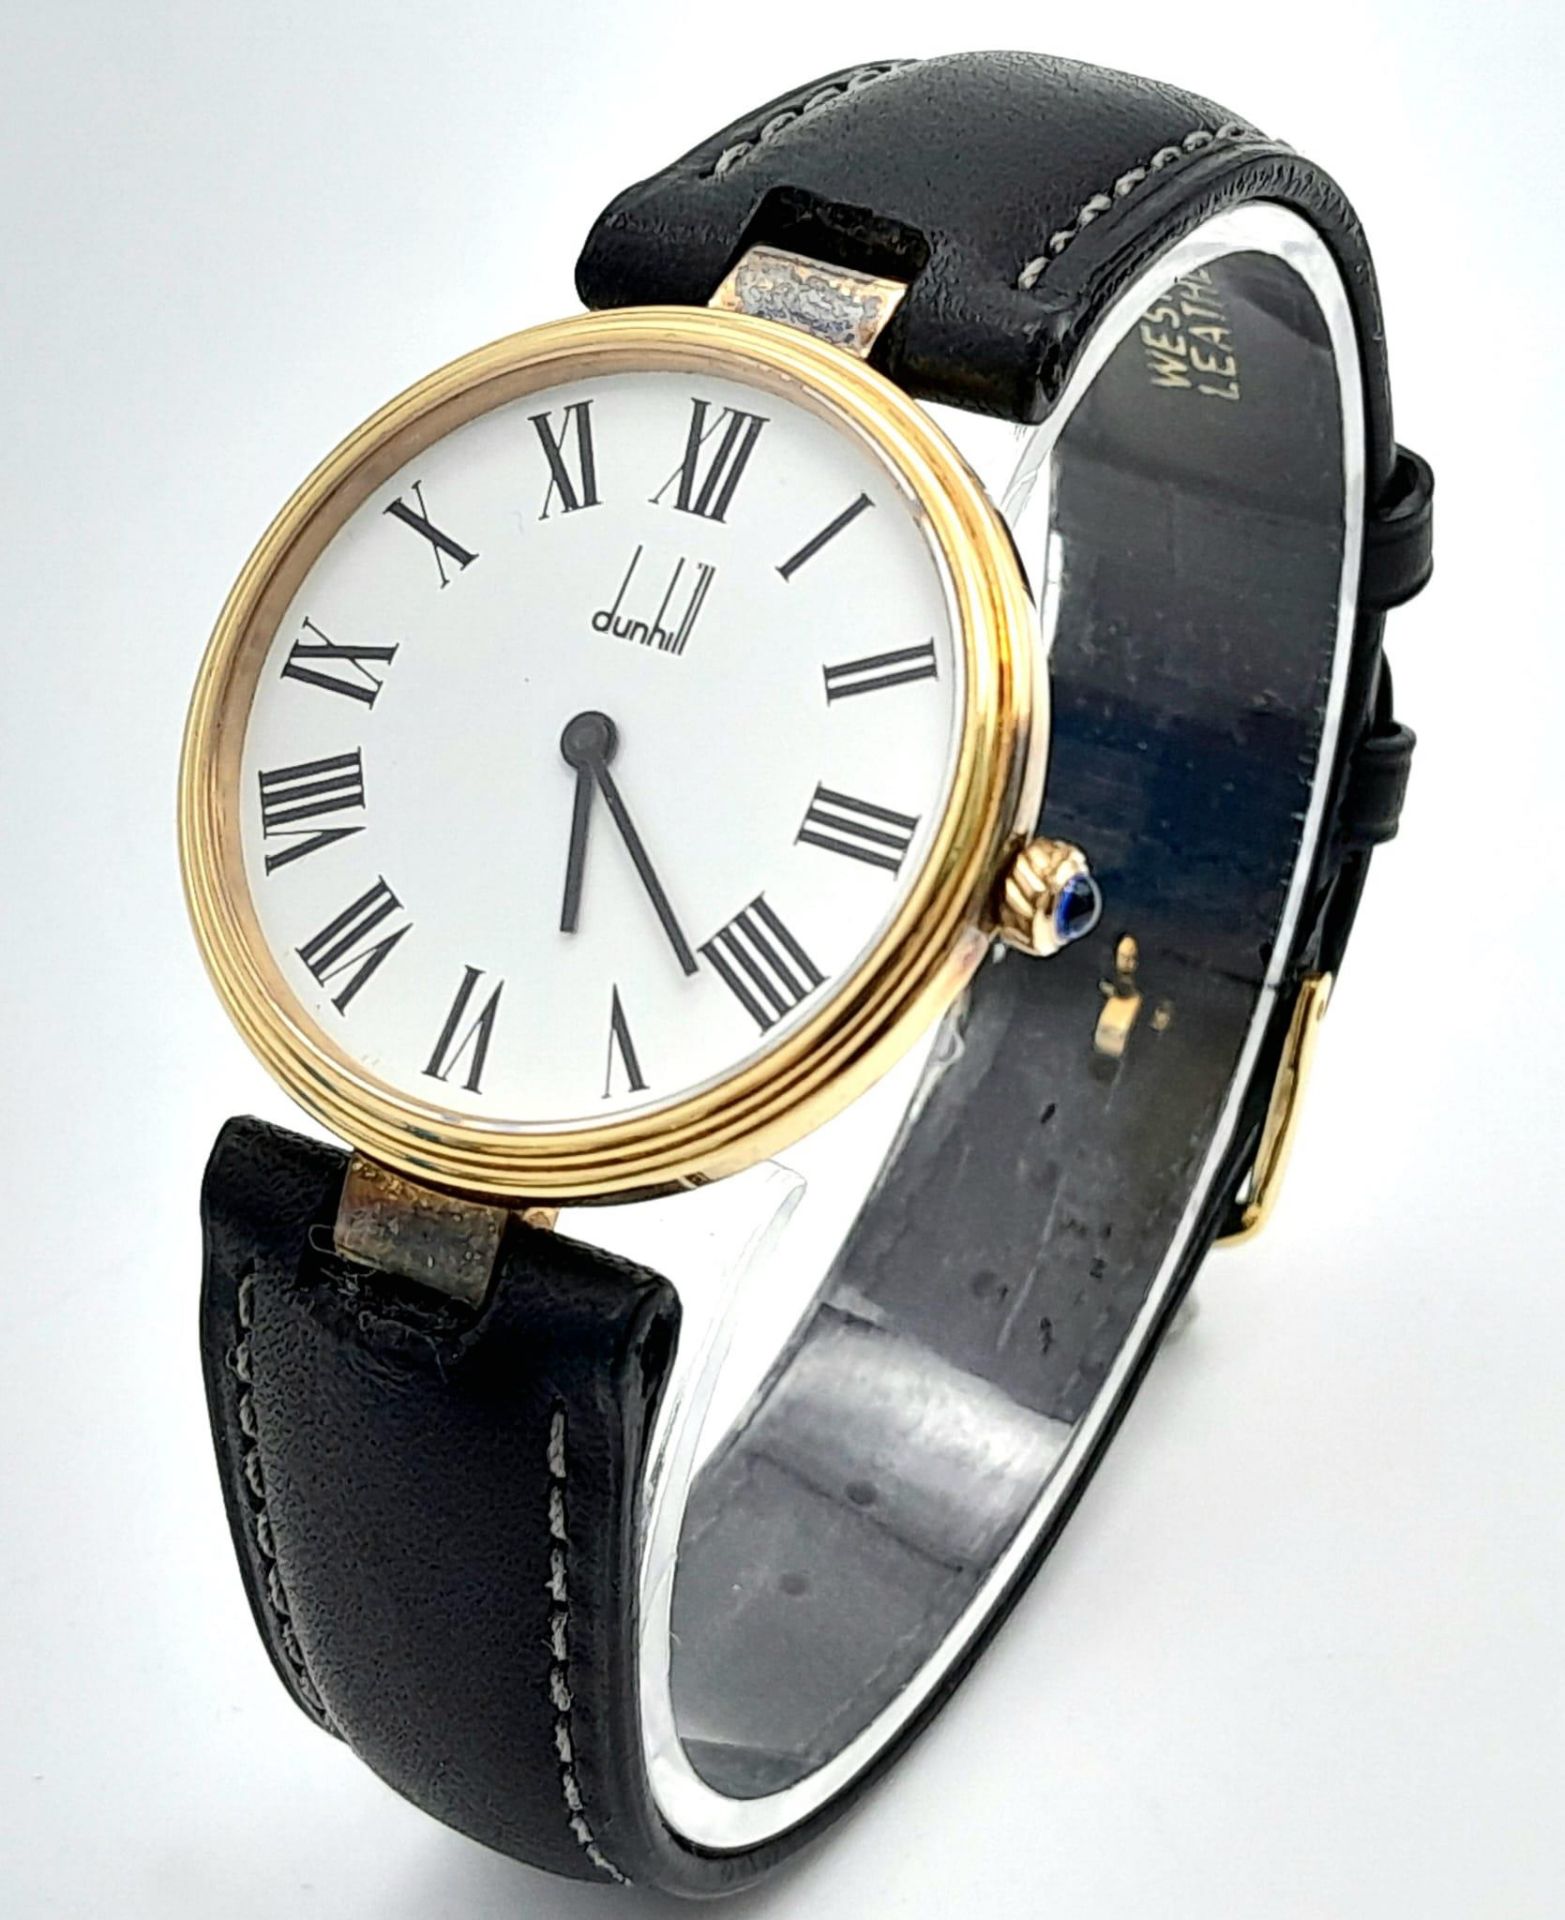 A Dunhill Sterling Silver Gilt Chronometer Watch. 34mm Case, Black Leather Strap. Full Working